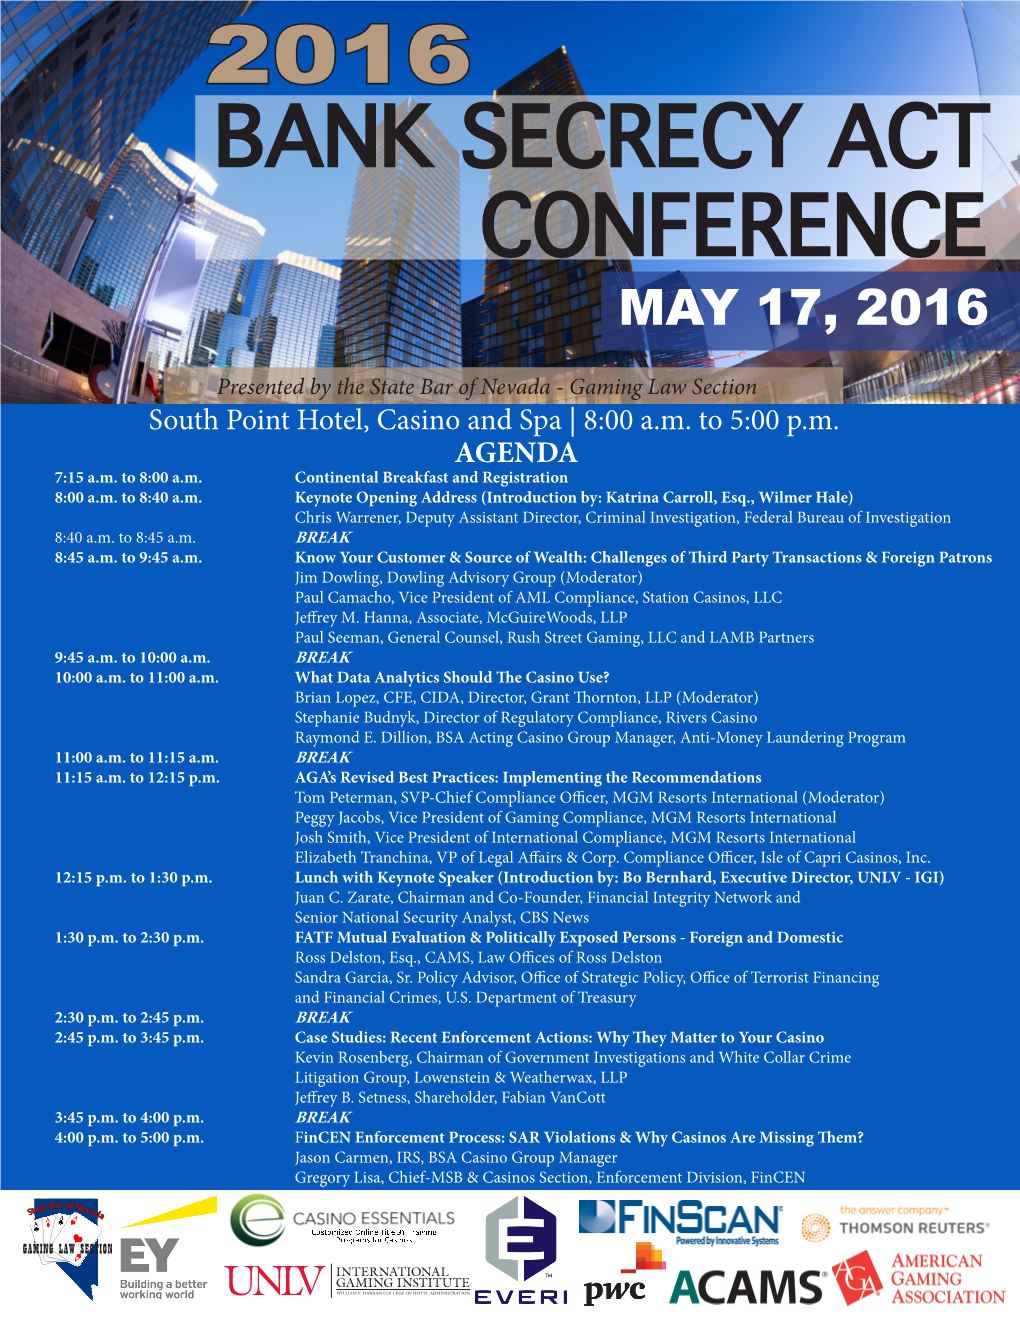 Bank Secrecy Act 2016 Conference